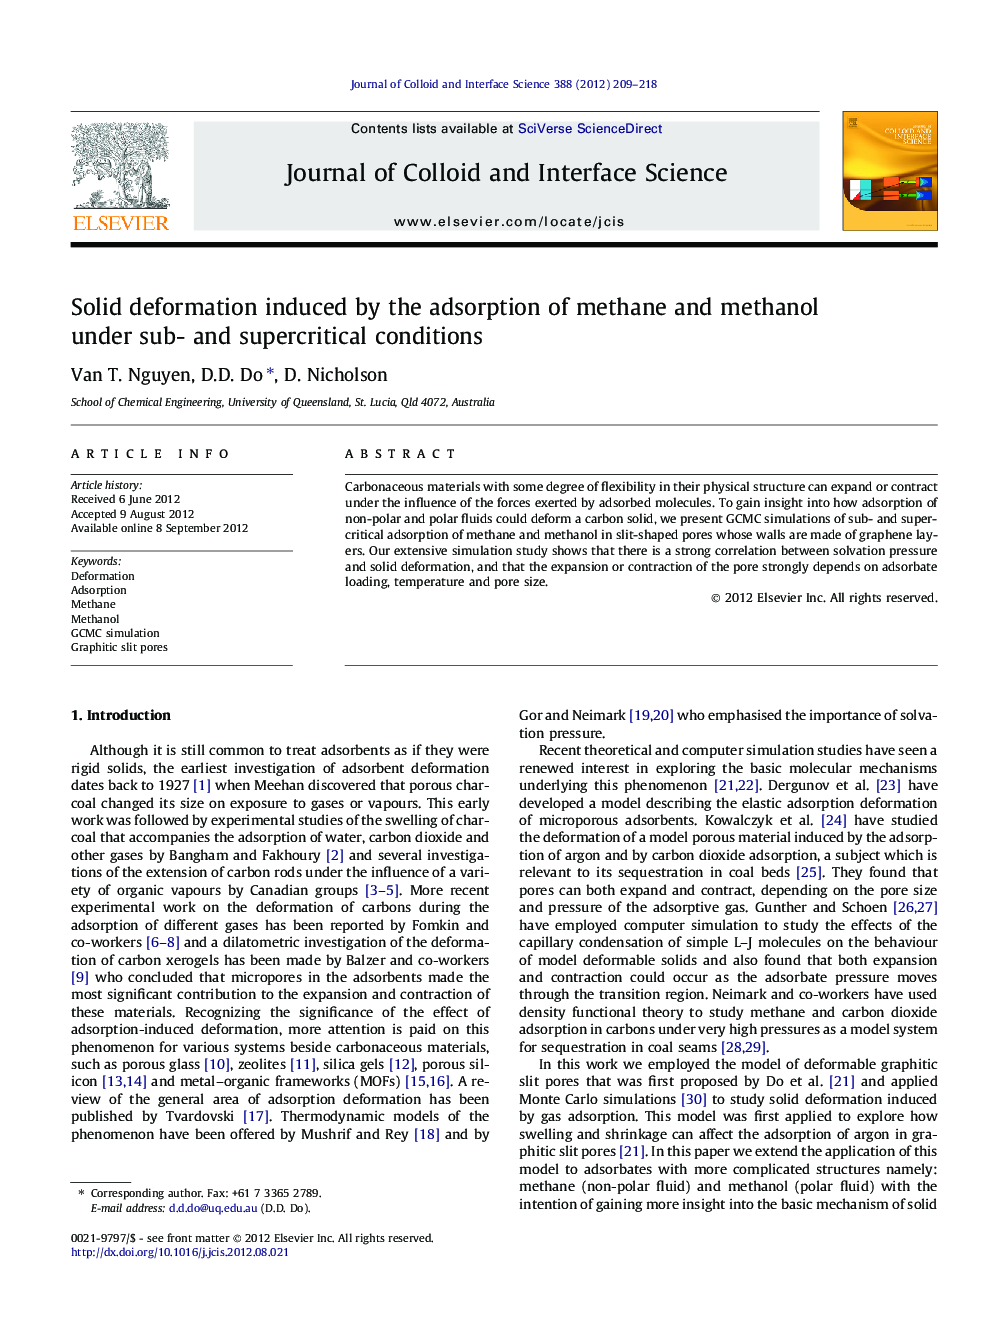 Solid deformation induced by the adsorption of methane and methanol under sub- and supercritical conditions